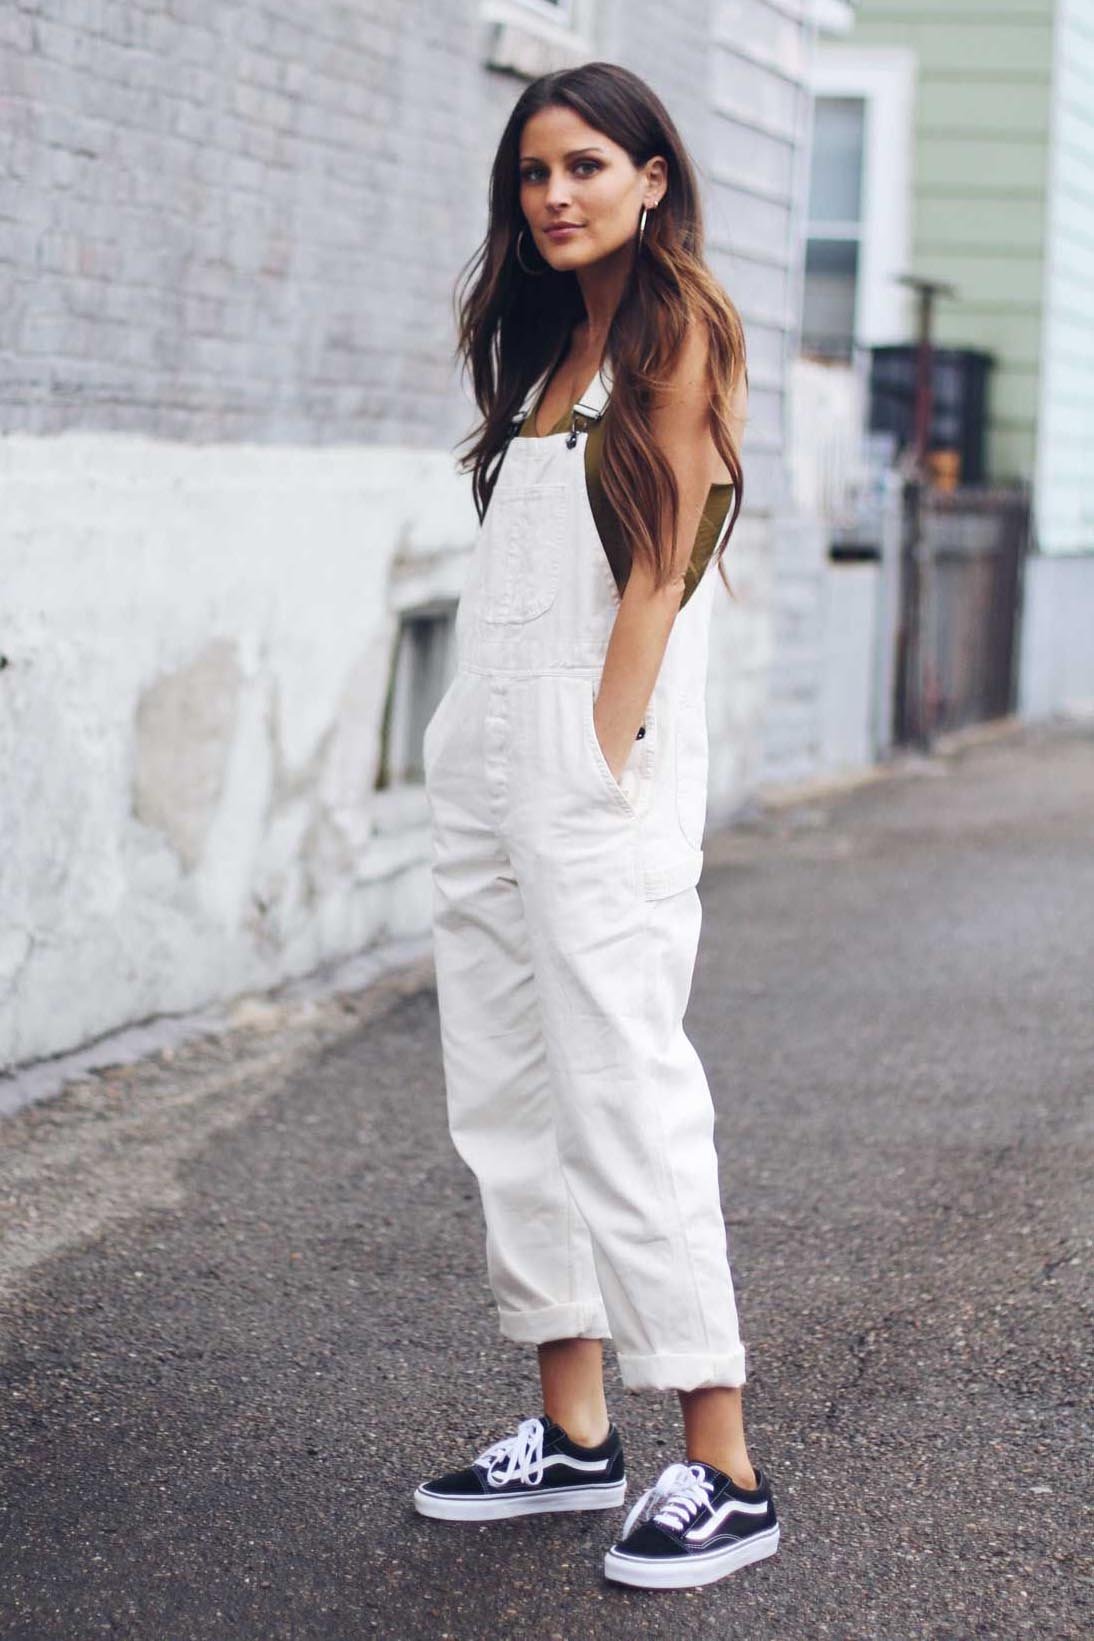 6 Shoes to Wear With a Jumpsuit